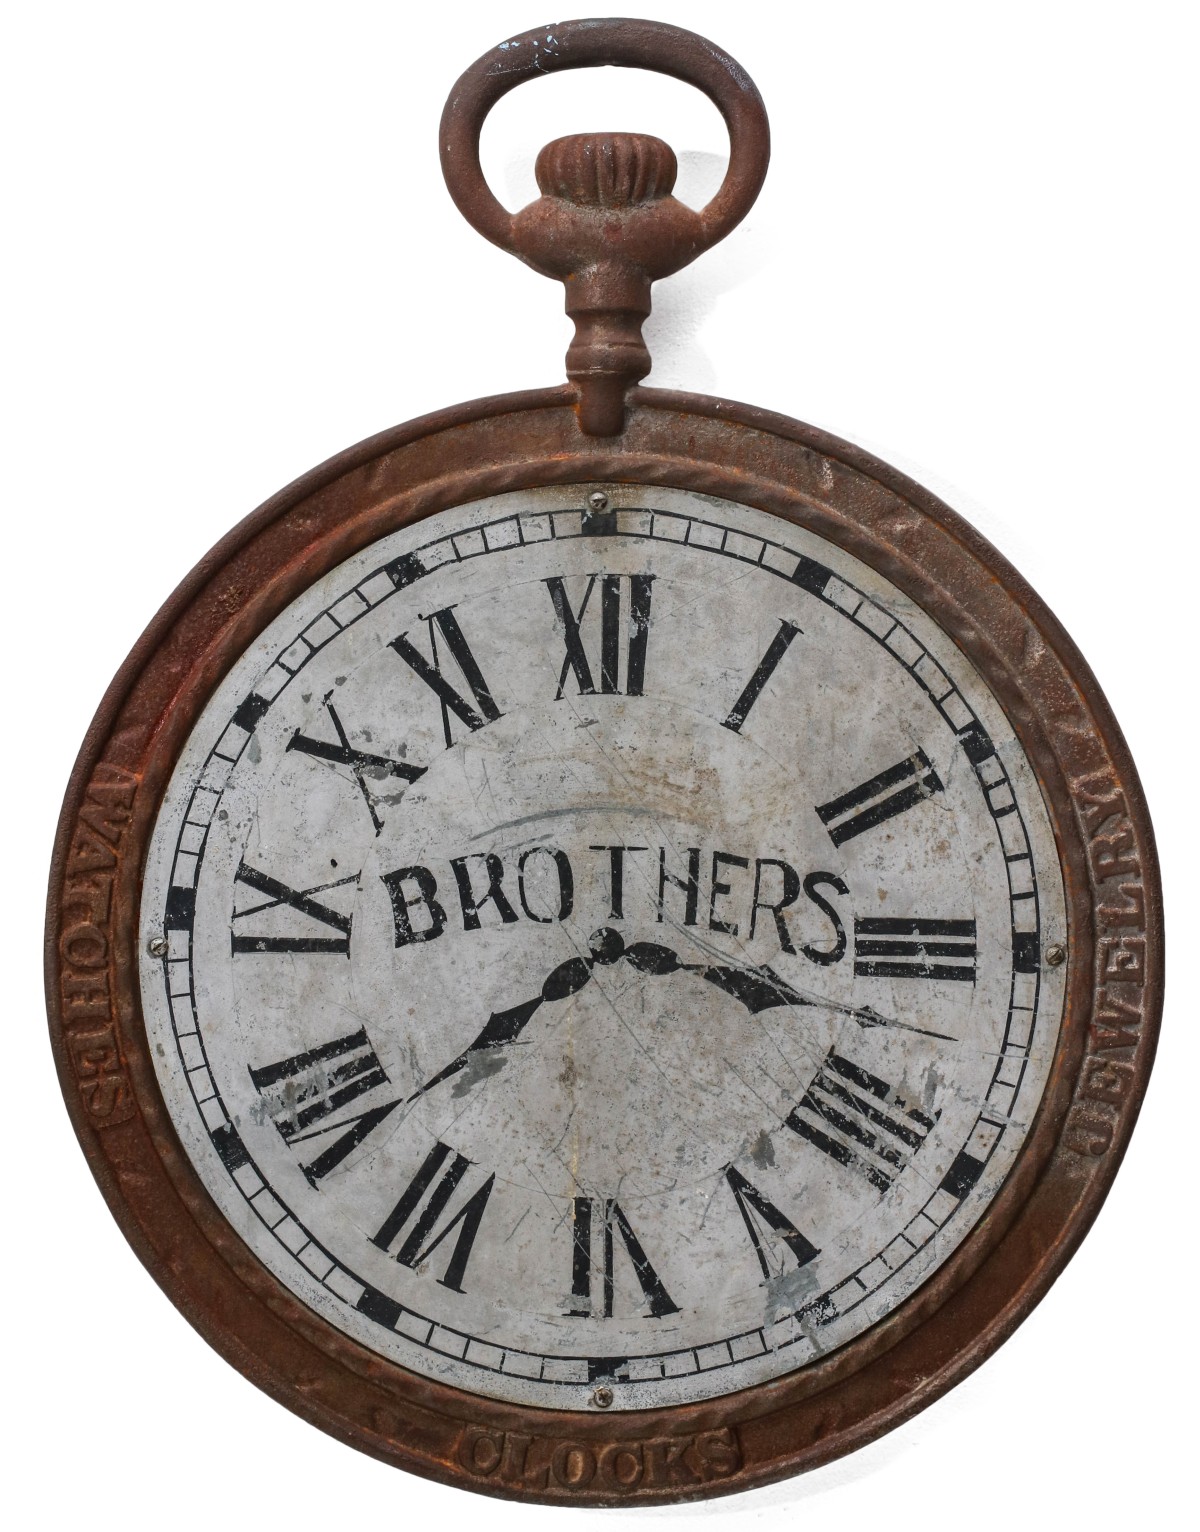 A CAST IRON AND ZINC WATCHMAKER'S TRADE SIGN C. 1900